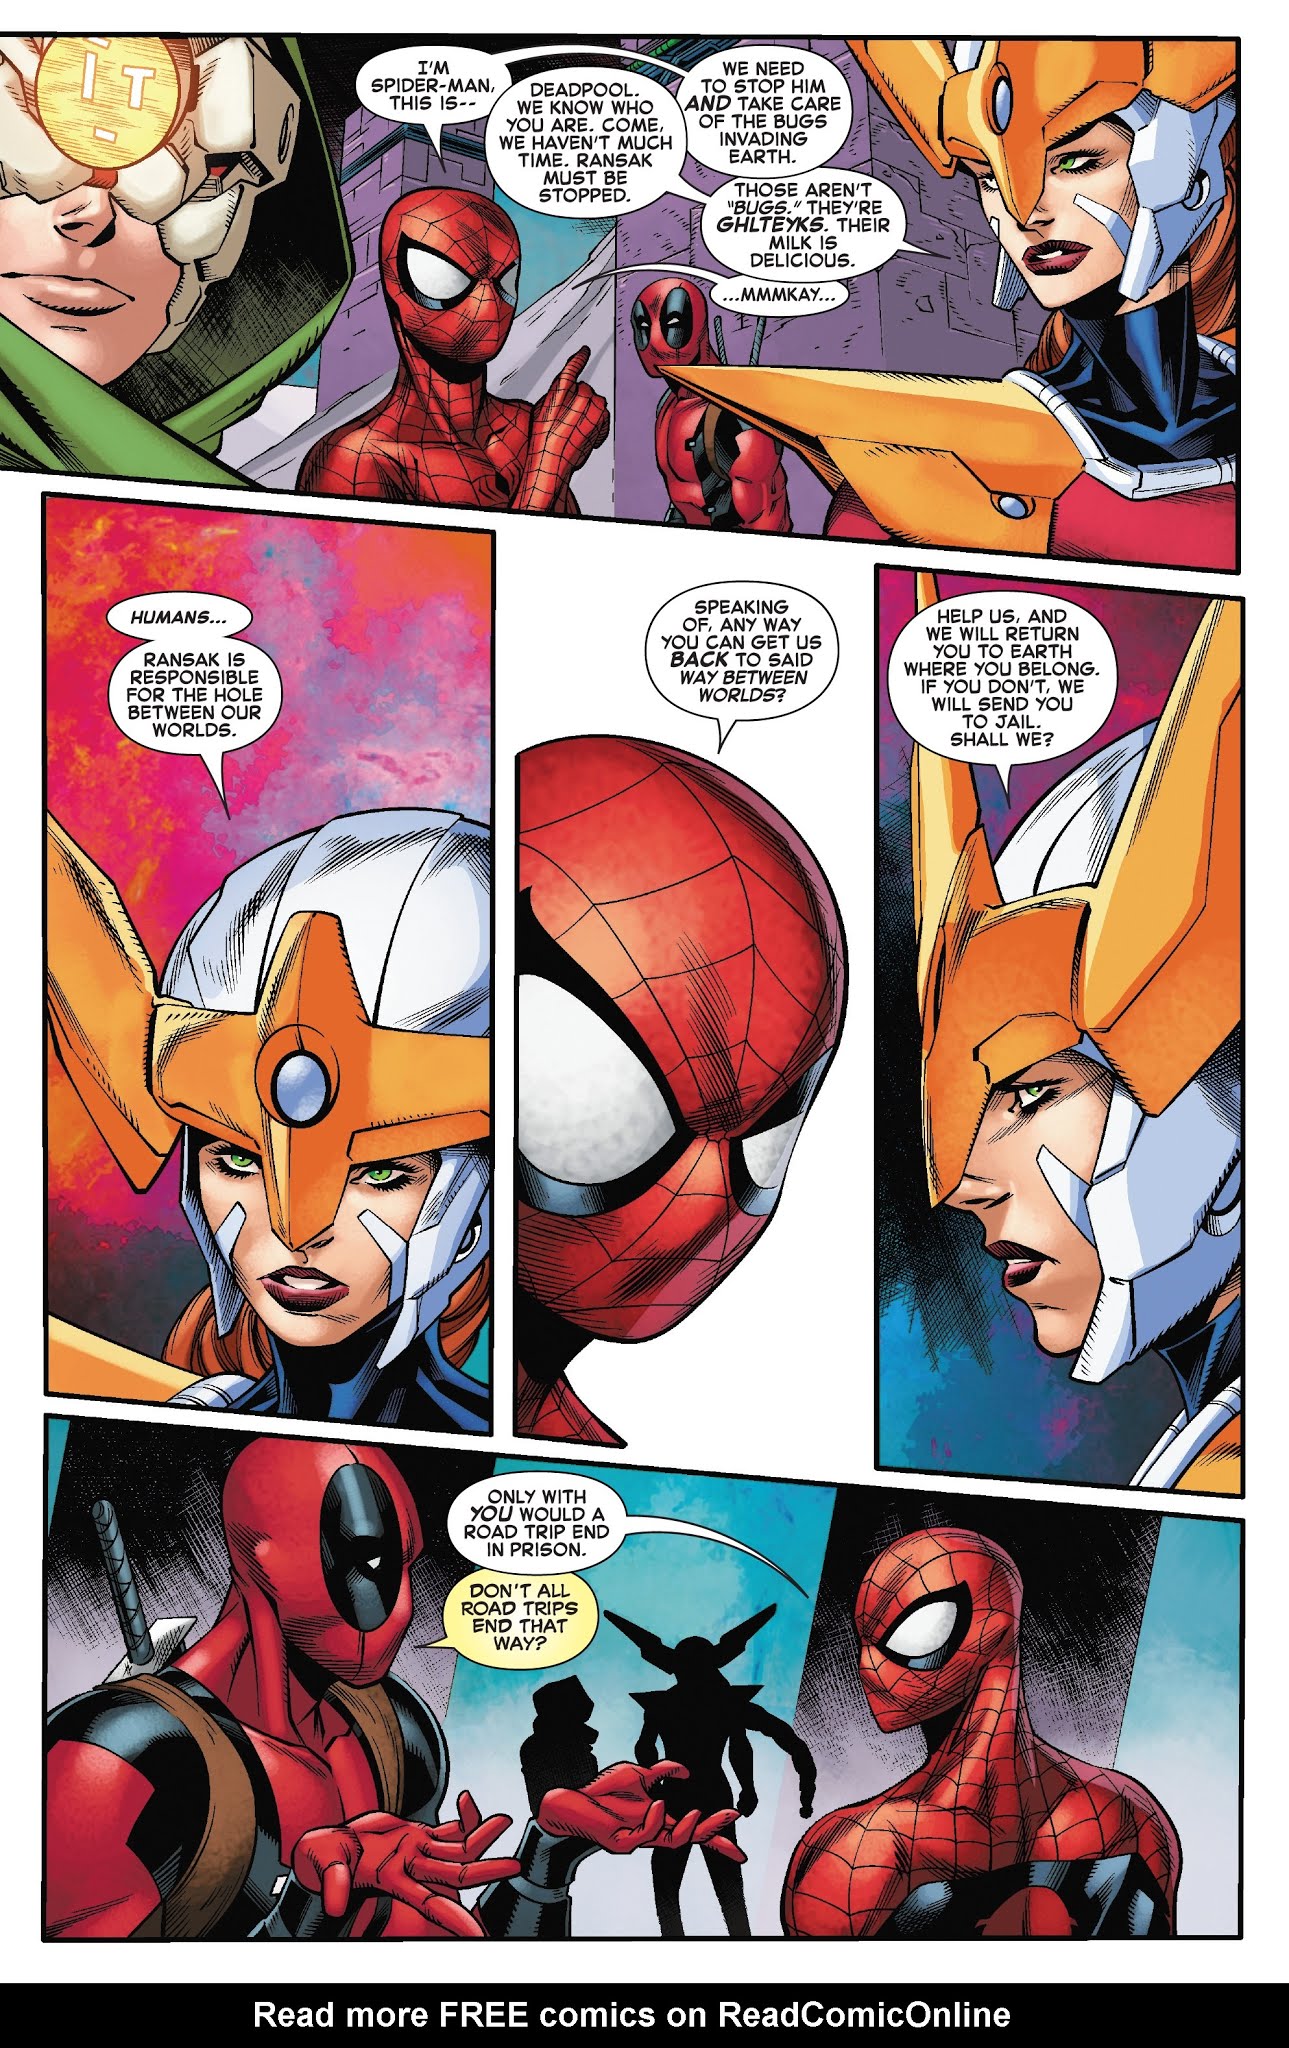 Spider Man Deadpool Issue 43 | Read Spider Man Deadpool Issue 43 comic  online in high quality. Read Full Comic online for free - Read comics  online in high quality .